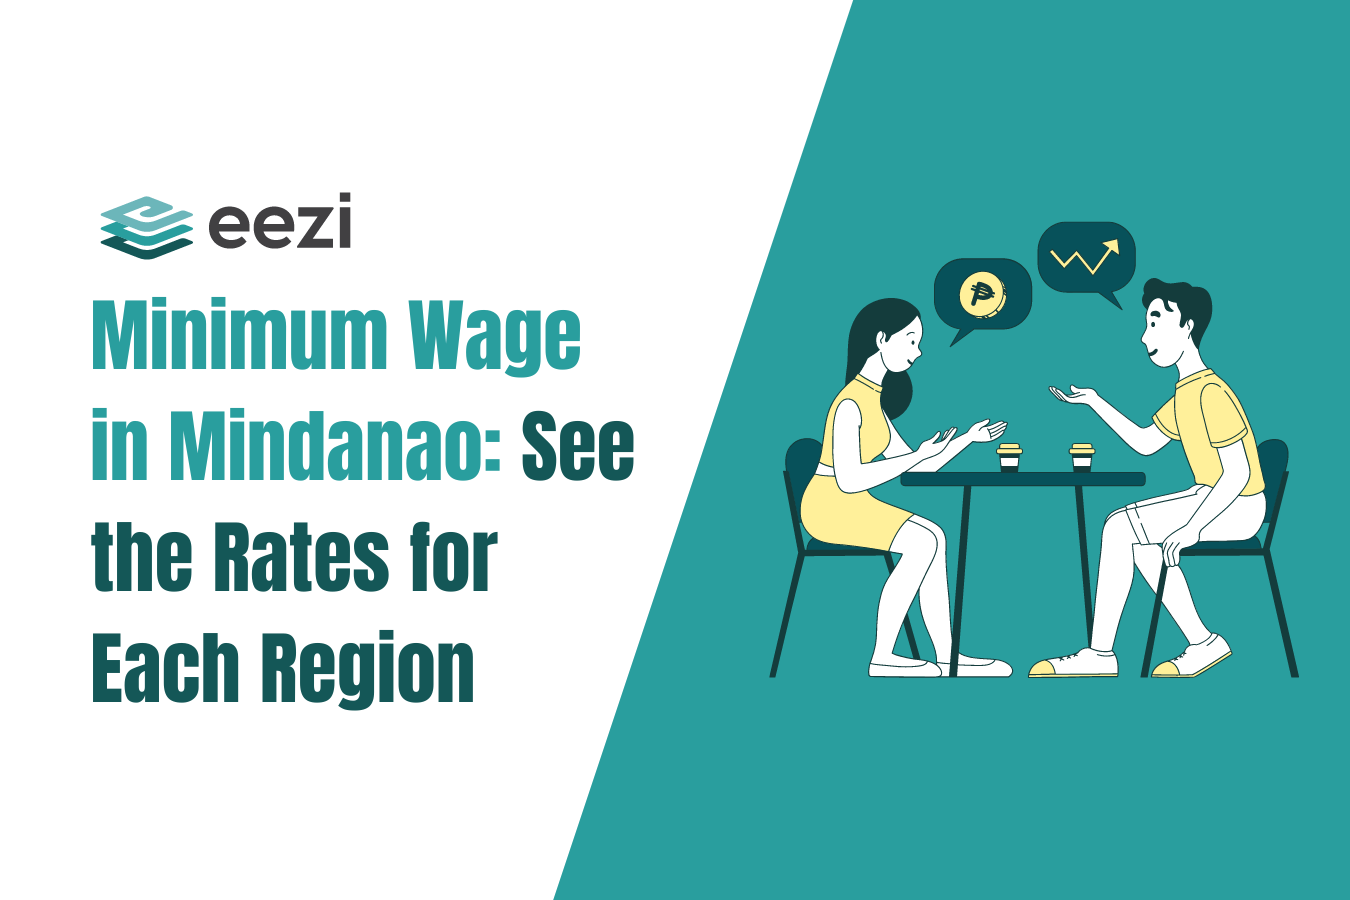 Minimum Wage in Mindanao: See the Rates for Each Region